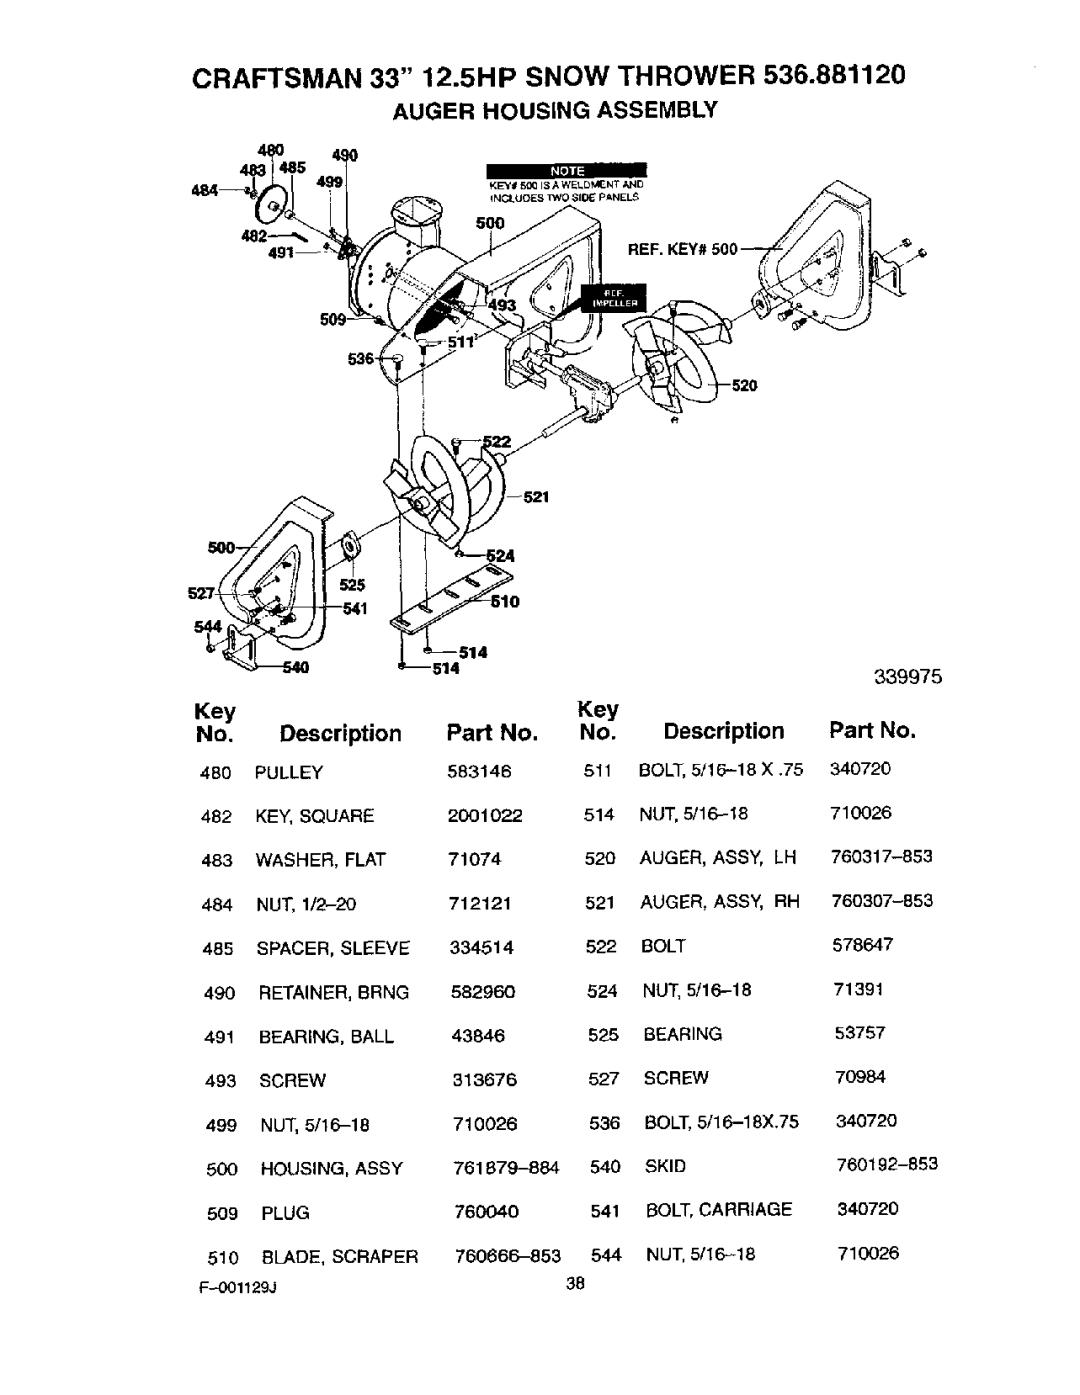 Craftsman 536.88112 operating instructions Auger Housing Assembly, Key 